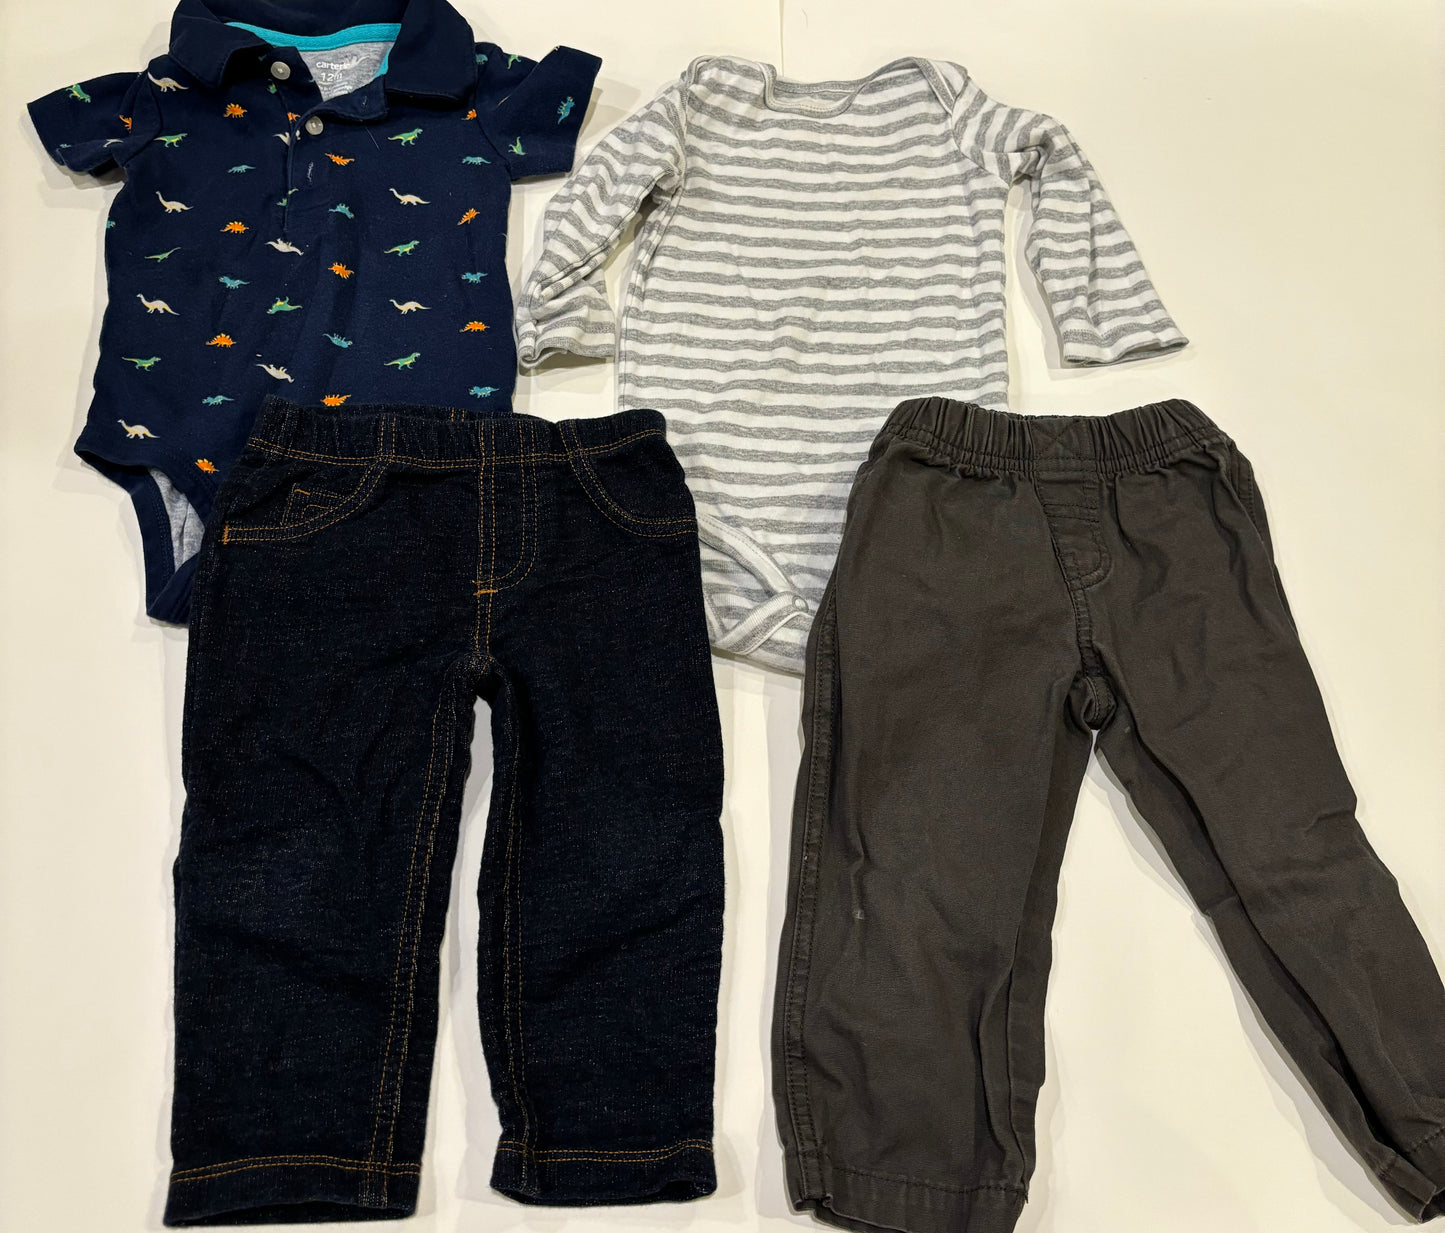 Boys 12 mo outfits, carters